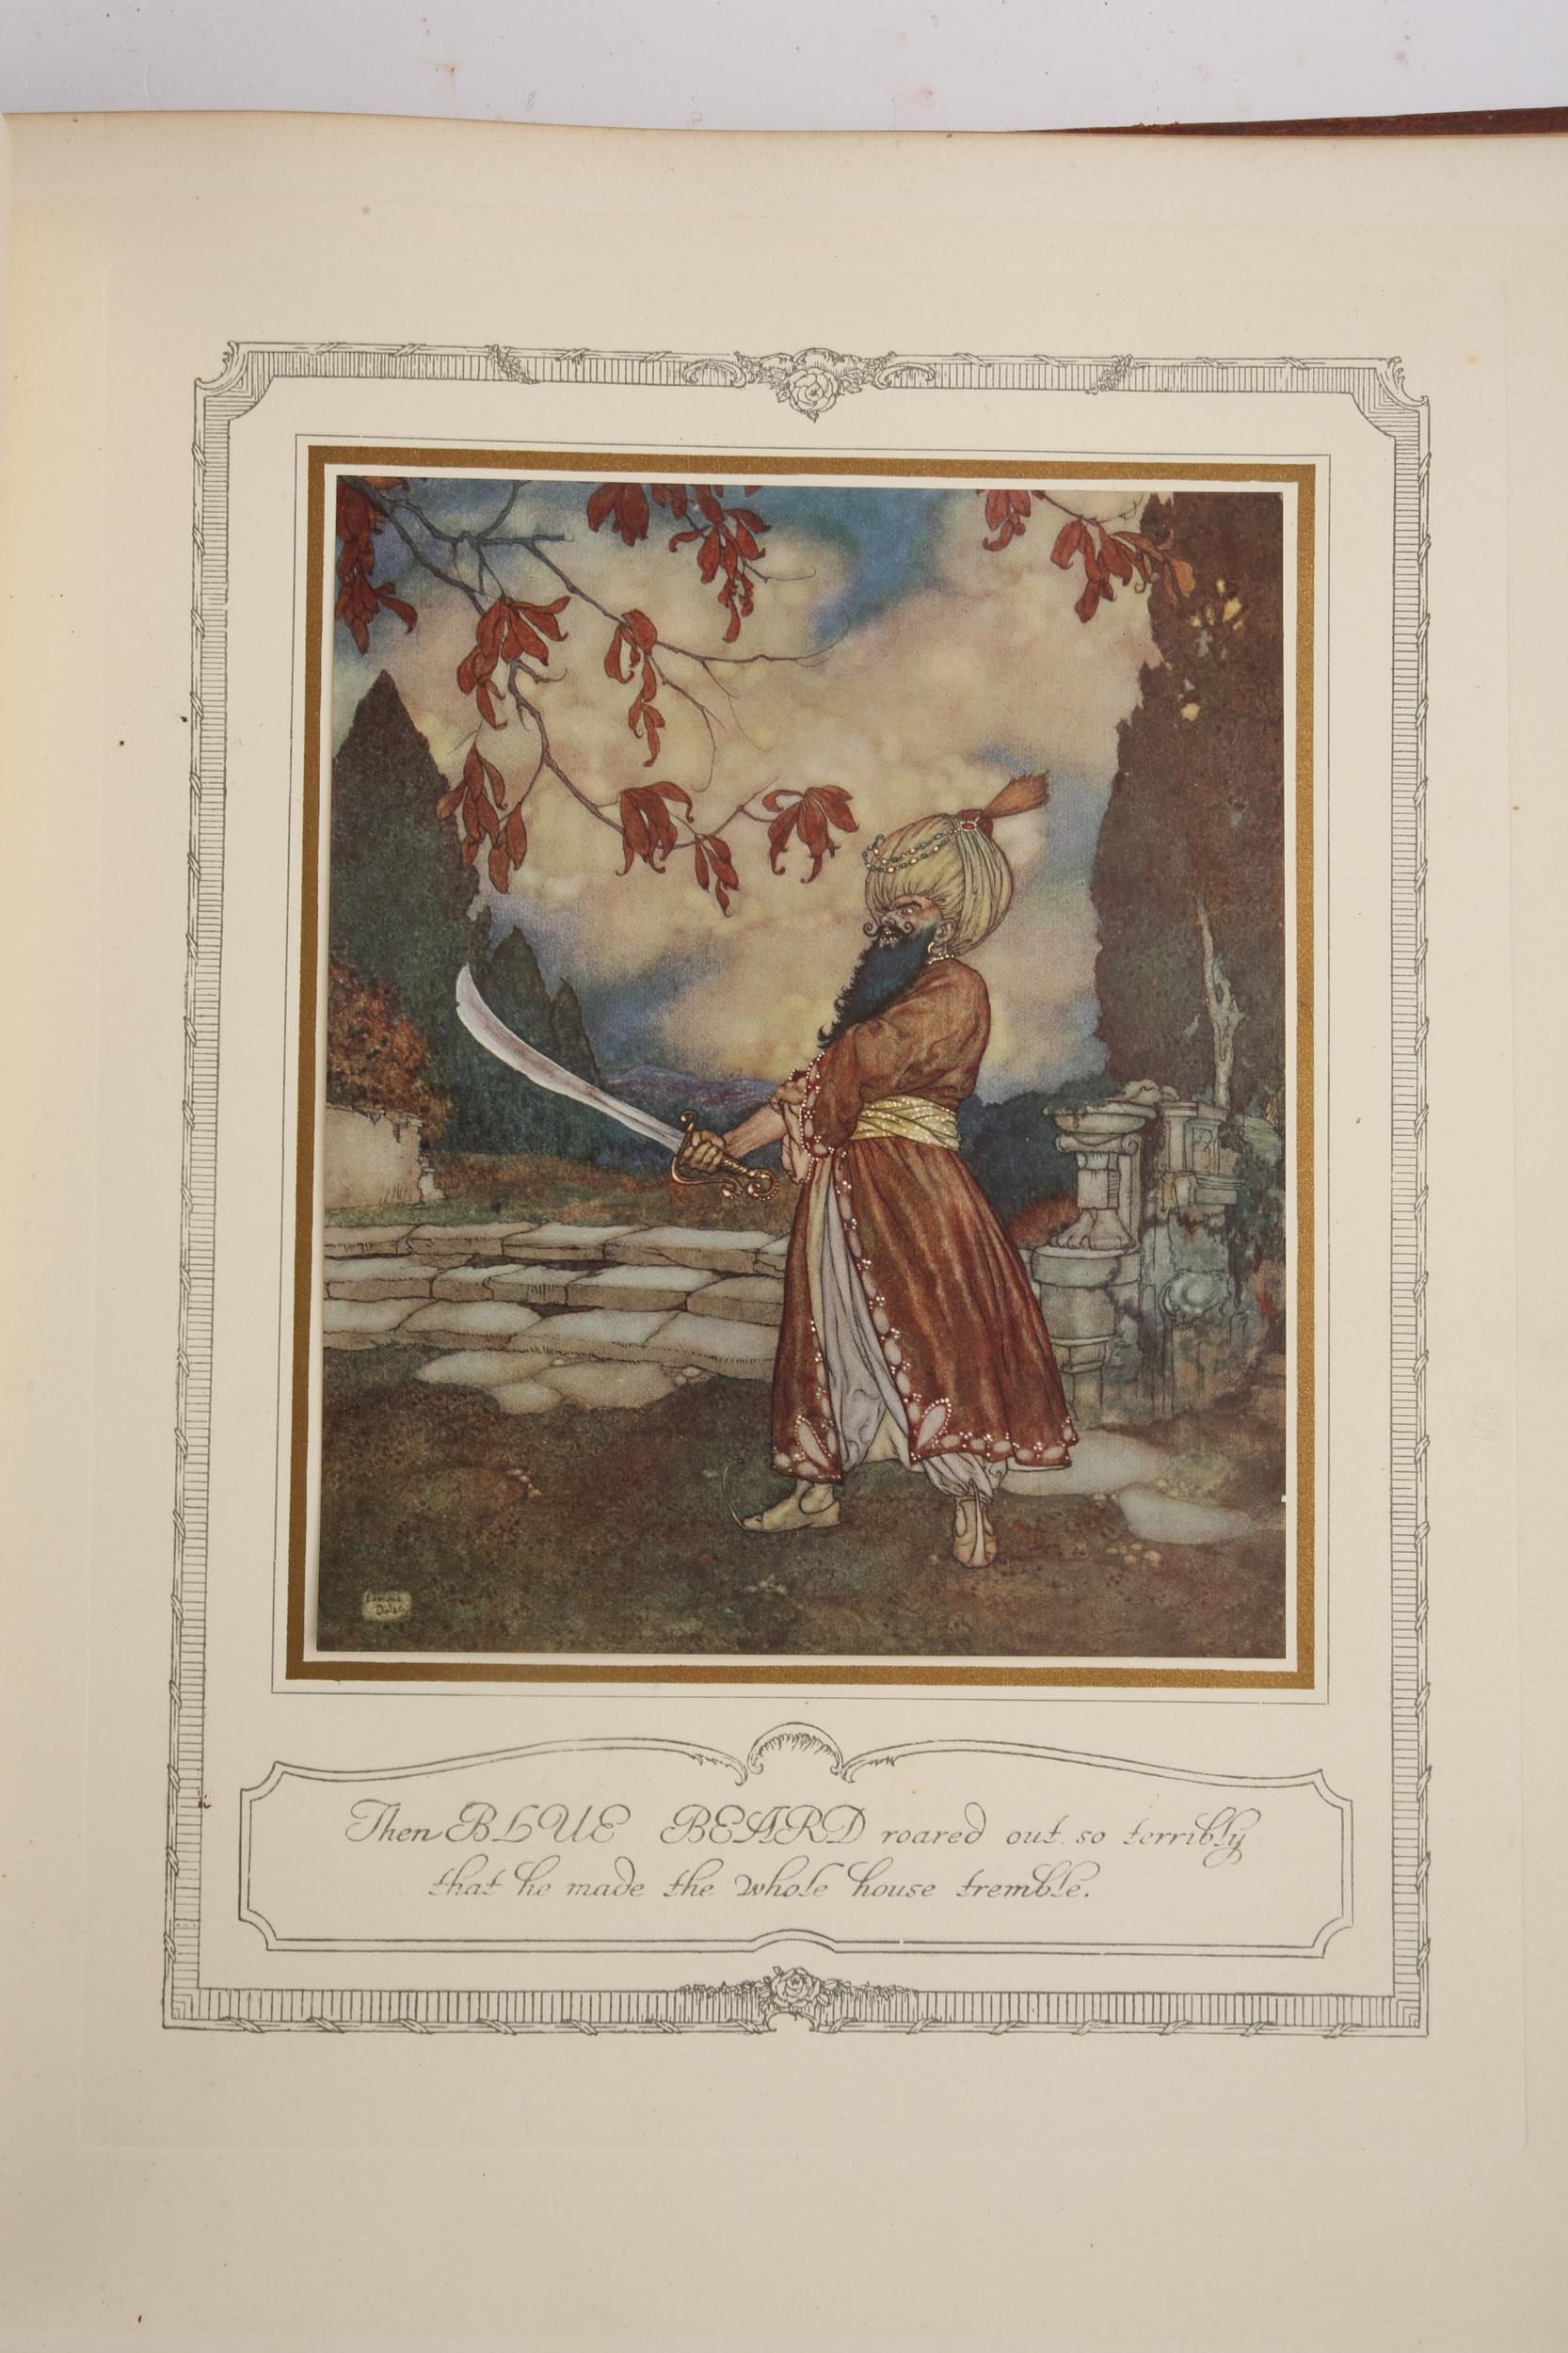 Arthur Quiller-Couch, 'The Sleeping Beauty and Other Fairy Tales', London, Hodder & Stoughton, - Image 9 of 21